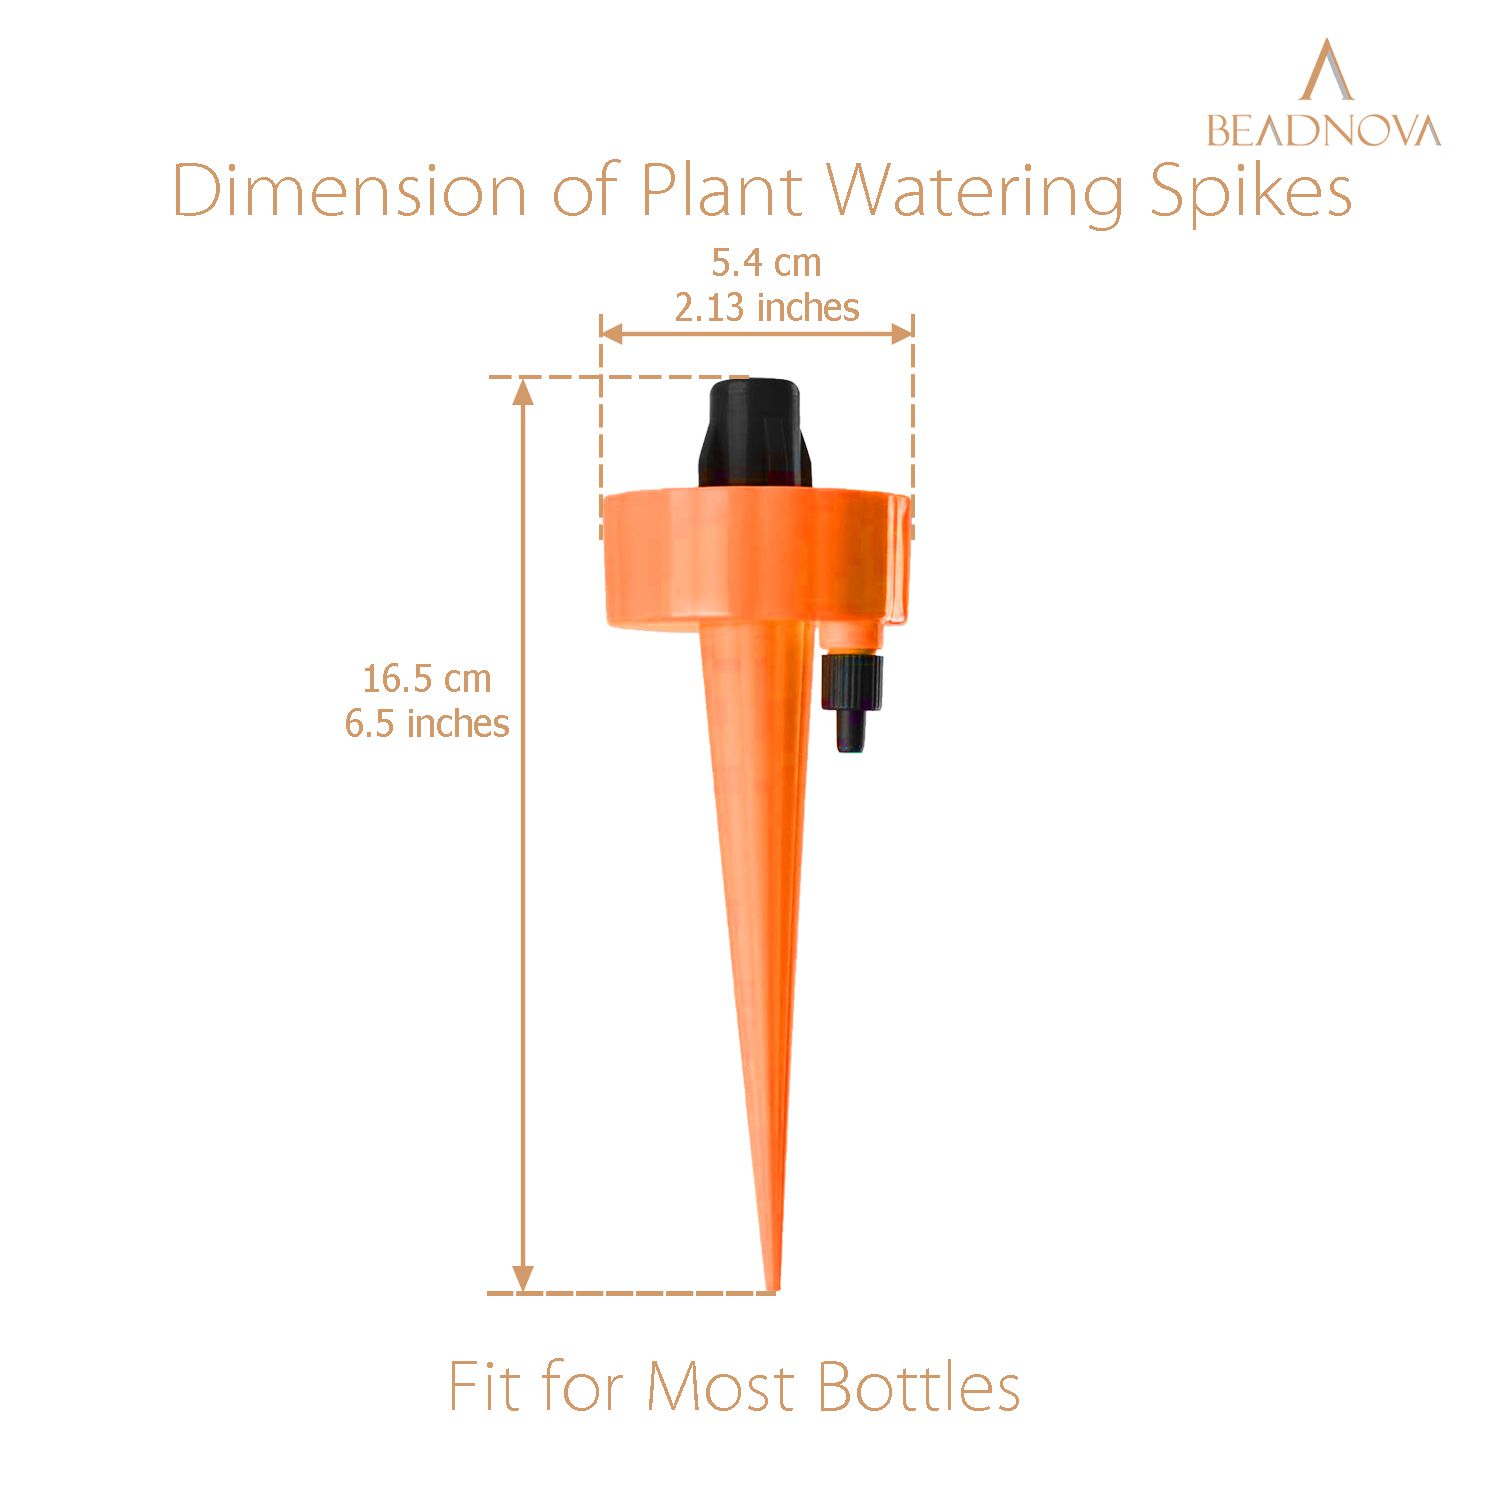 BEADNOVA Plant Self Watering Spikes Automatic Irrigation Equipment Adjustable Self Watering Spikes for Plants with Slow Release Control Valve Orange Green, 6pcs 